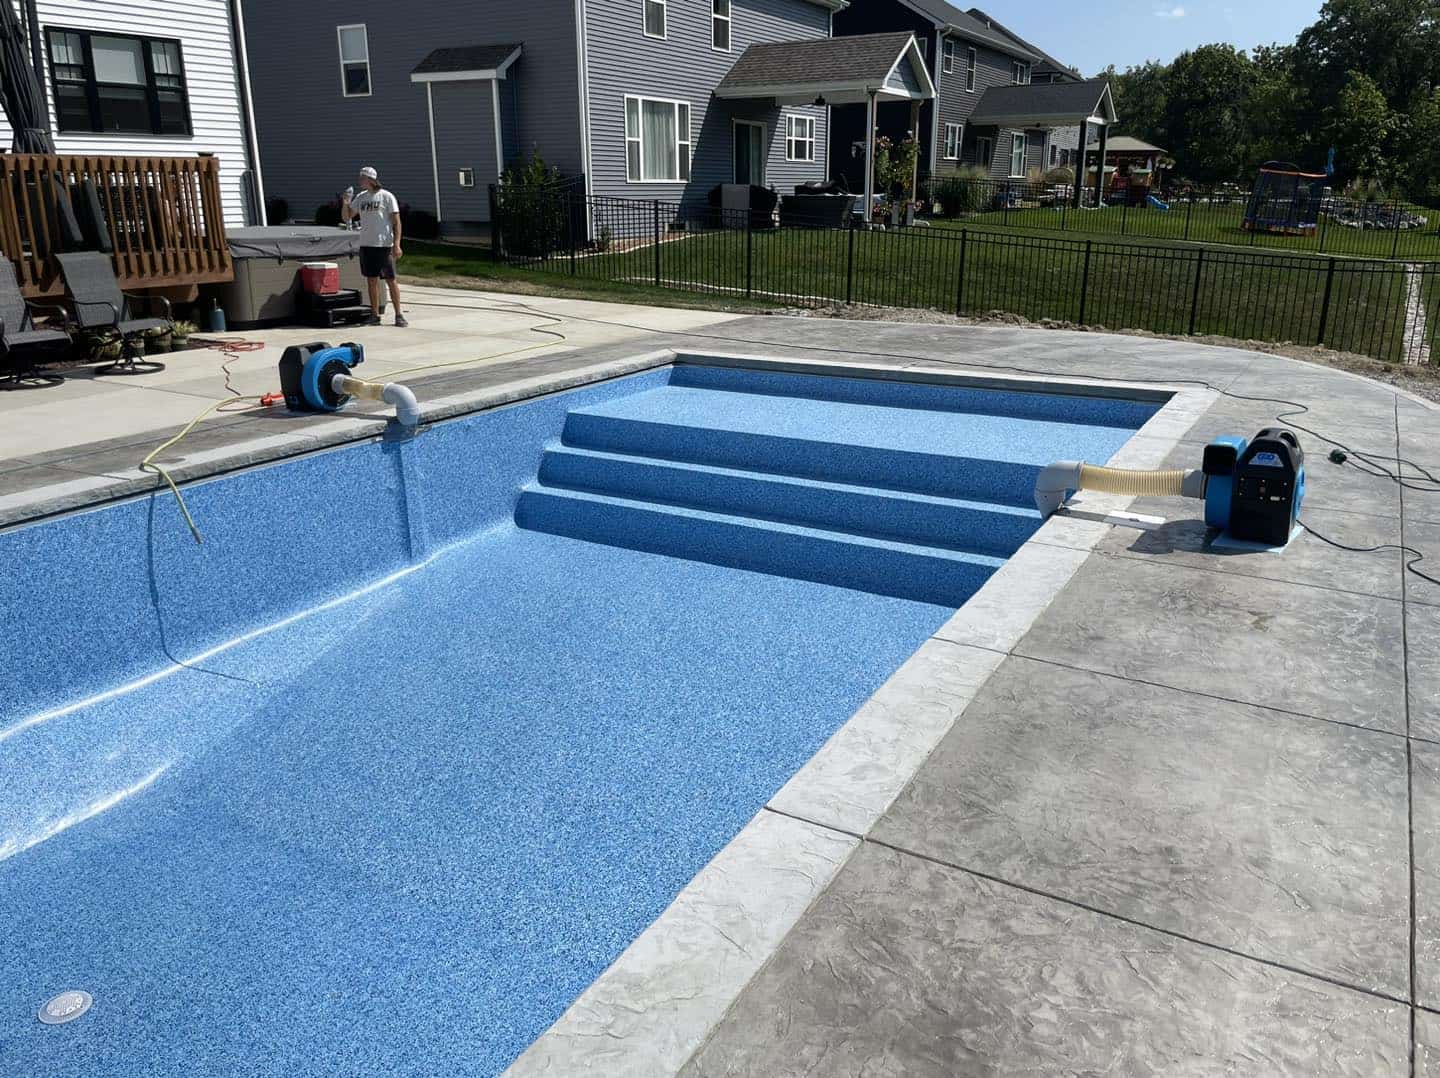 A pool is being cleaned with a pressure washer.